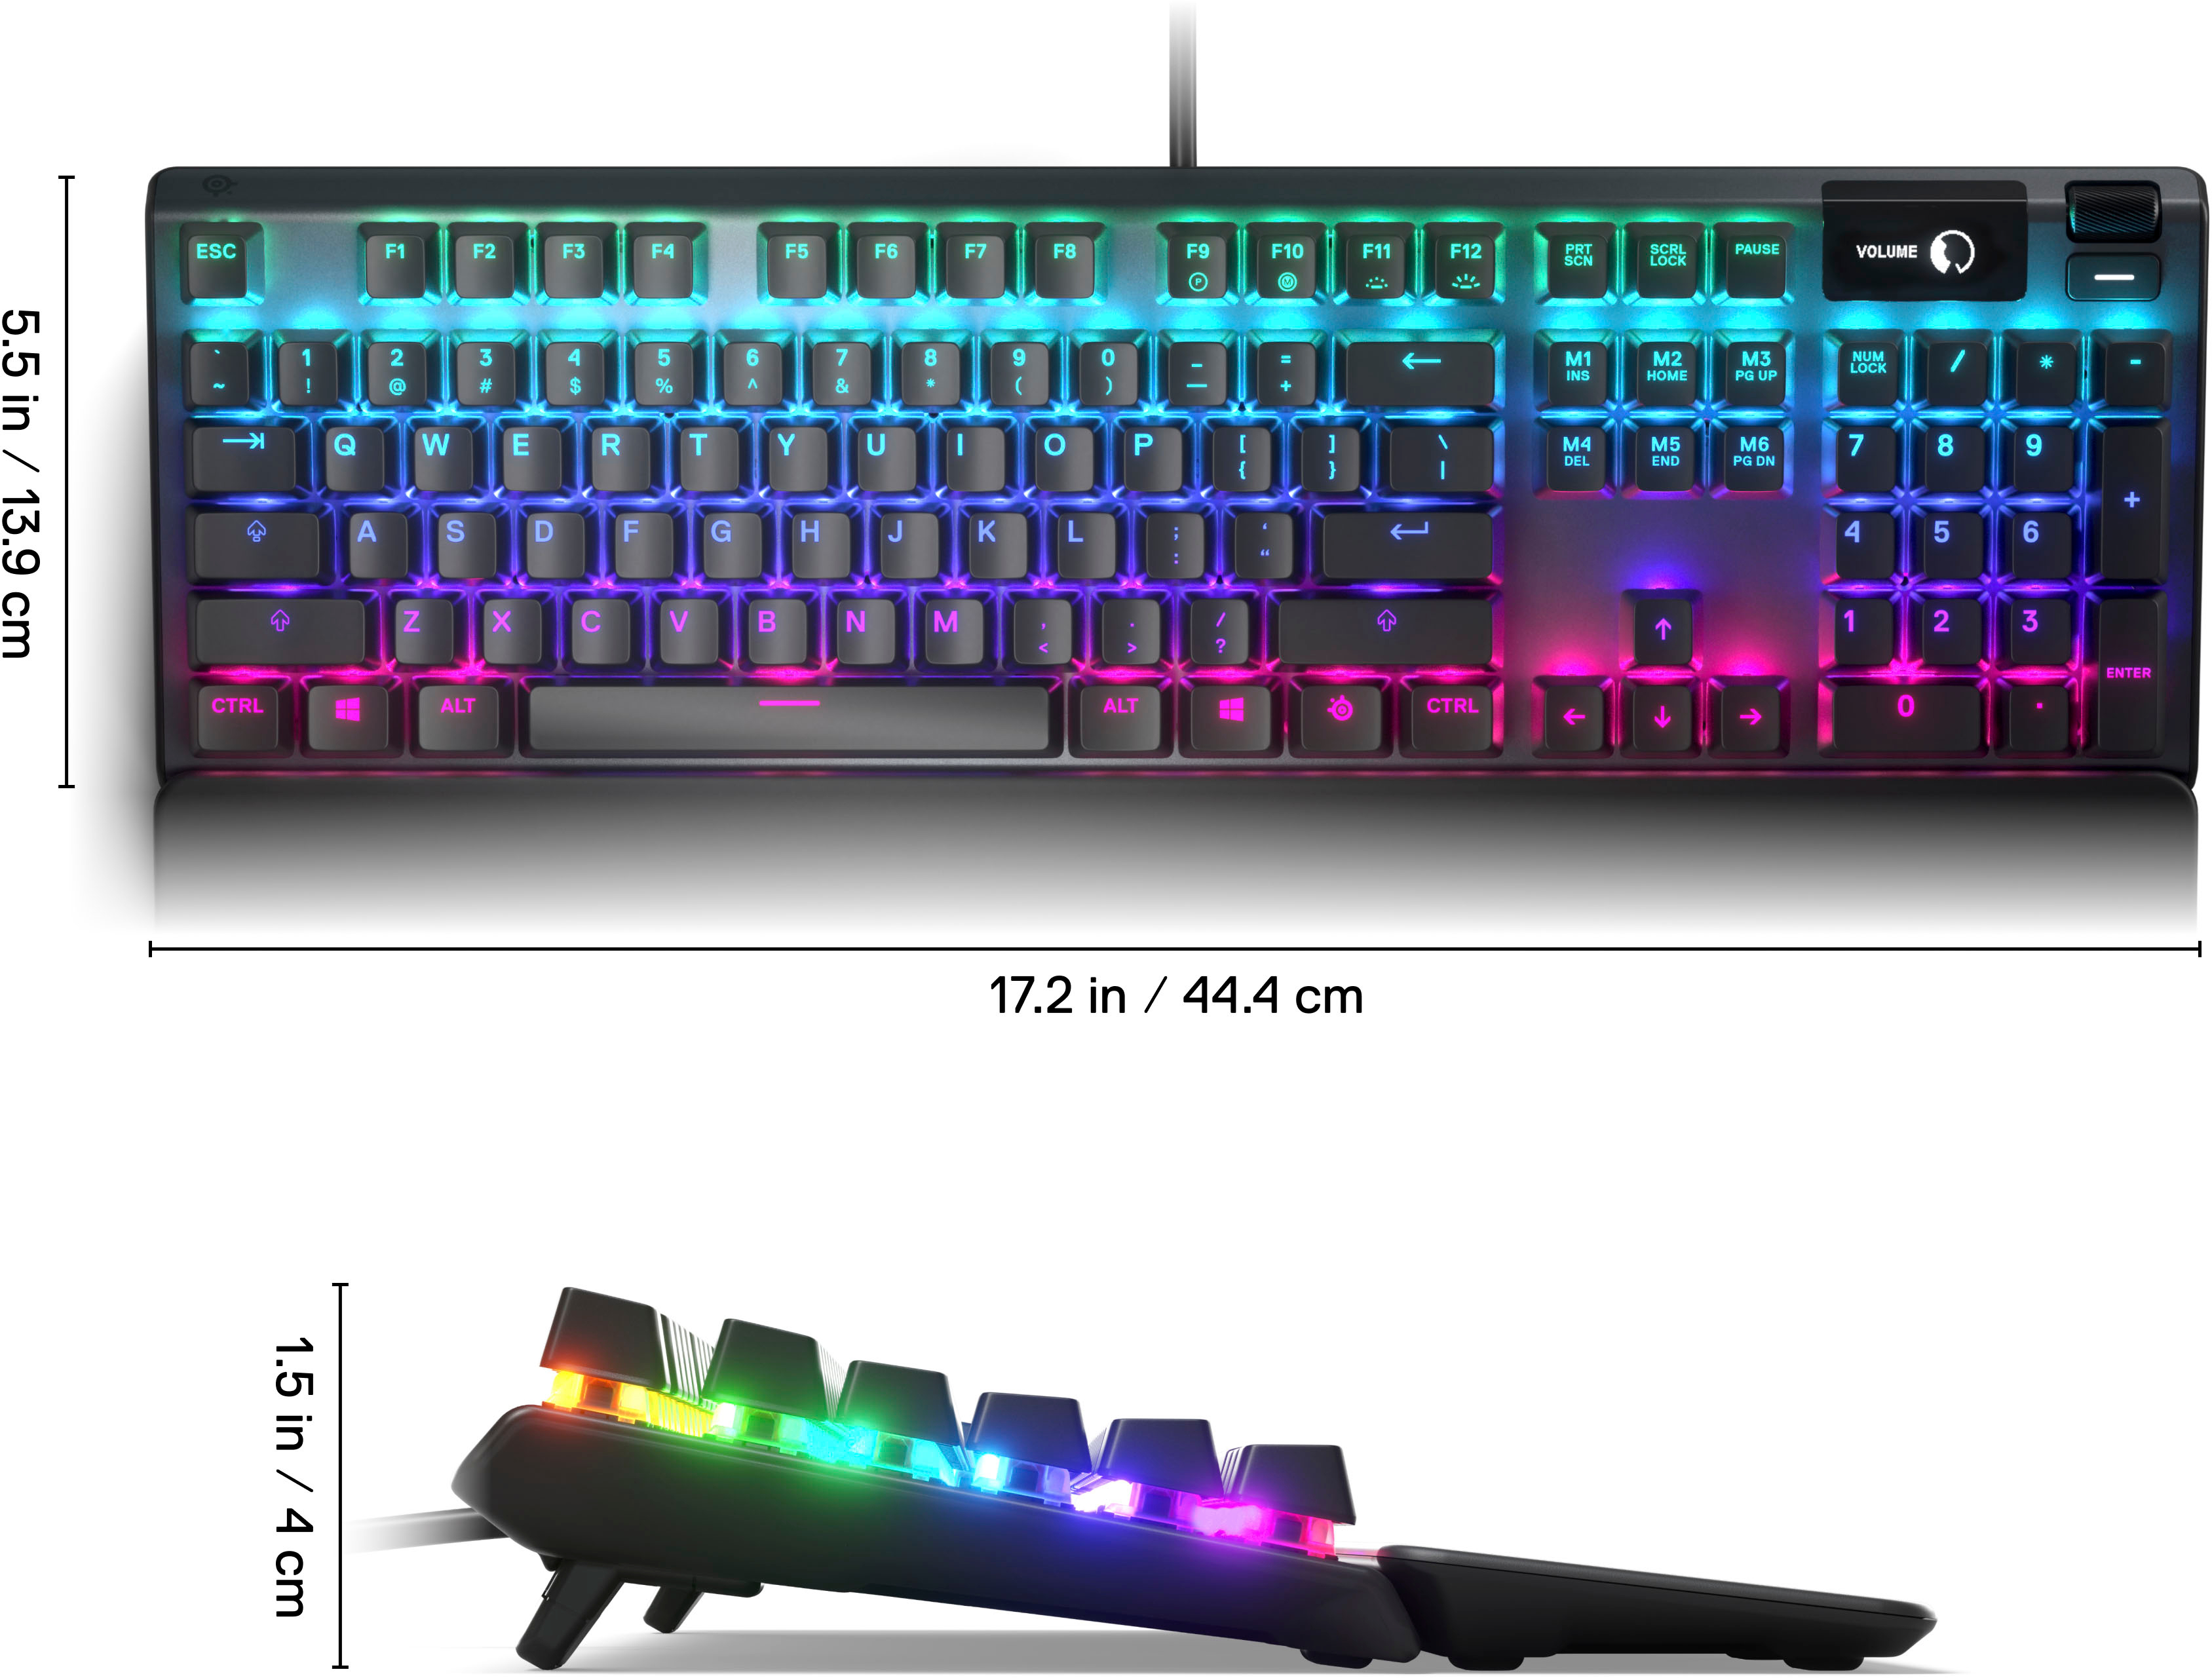 SteelSeries Apex 5 gaming keyboard review: Silky smooth with a